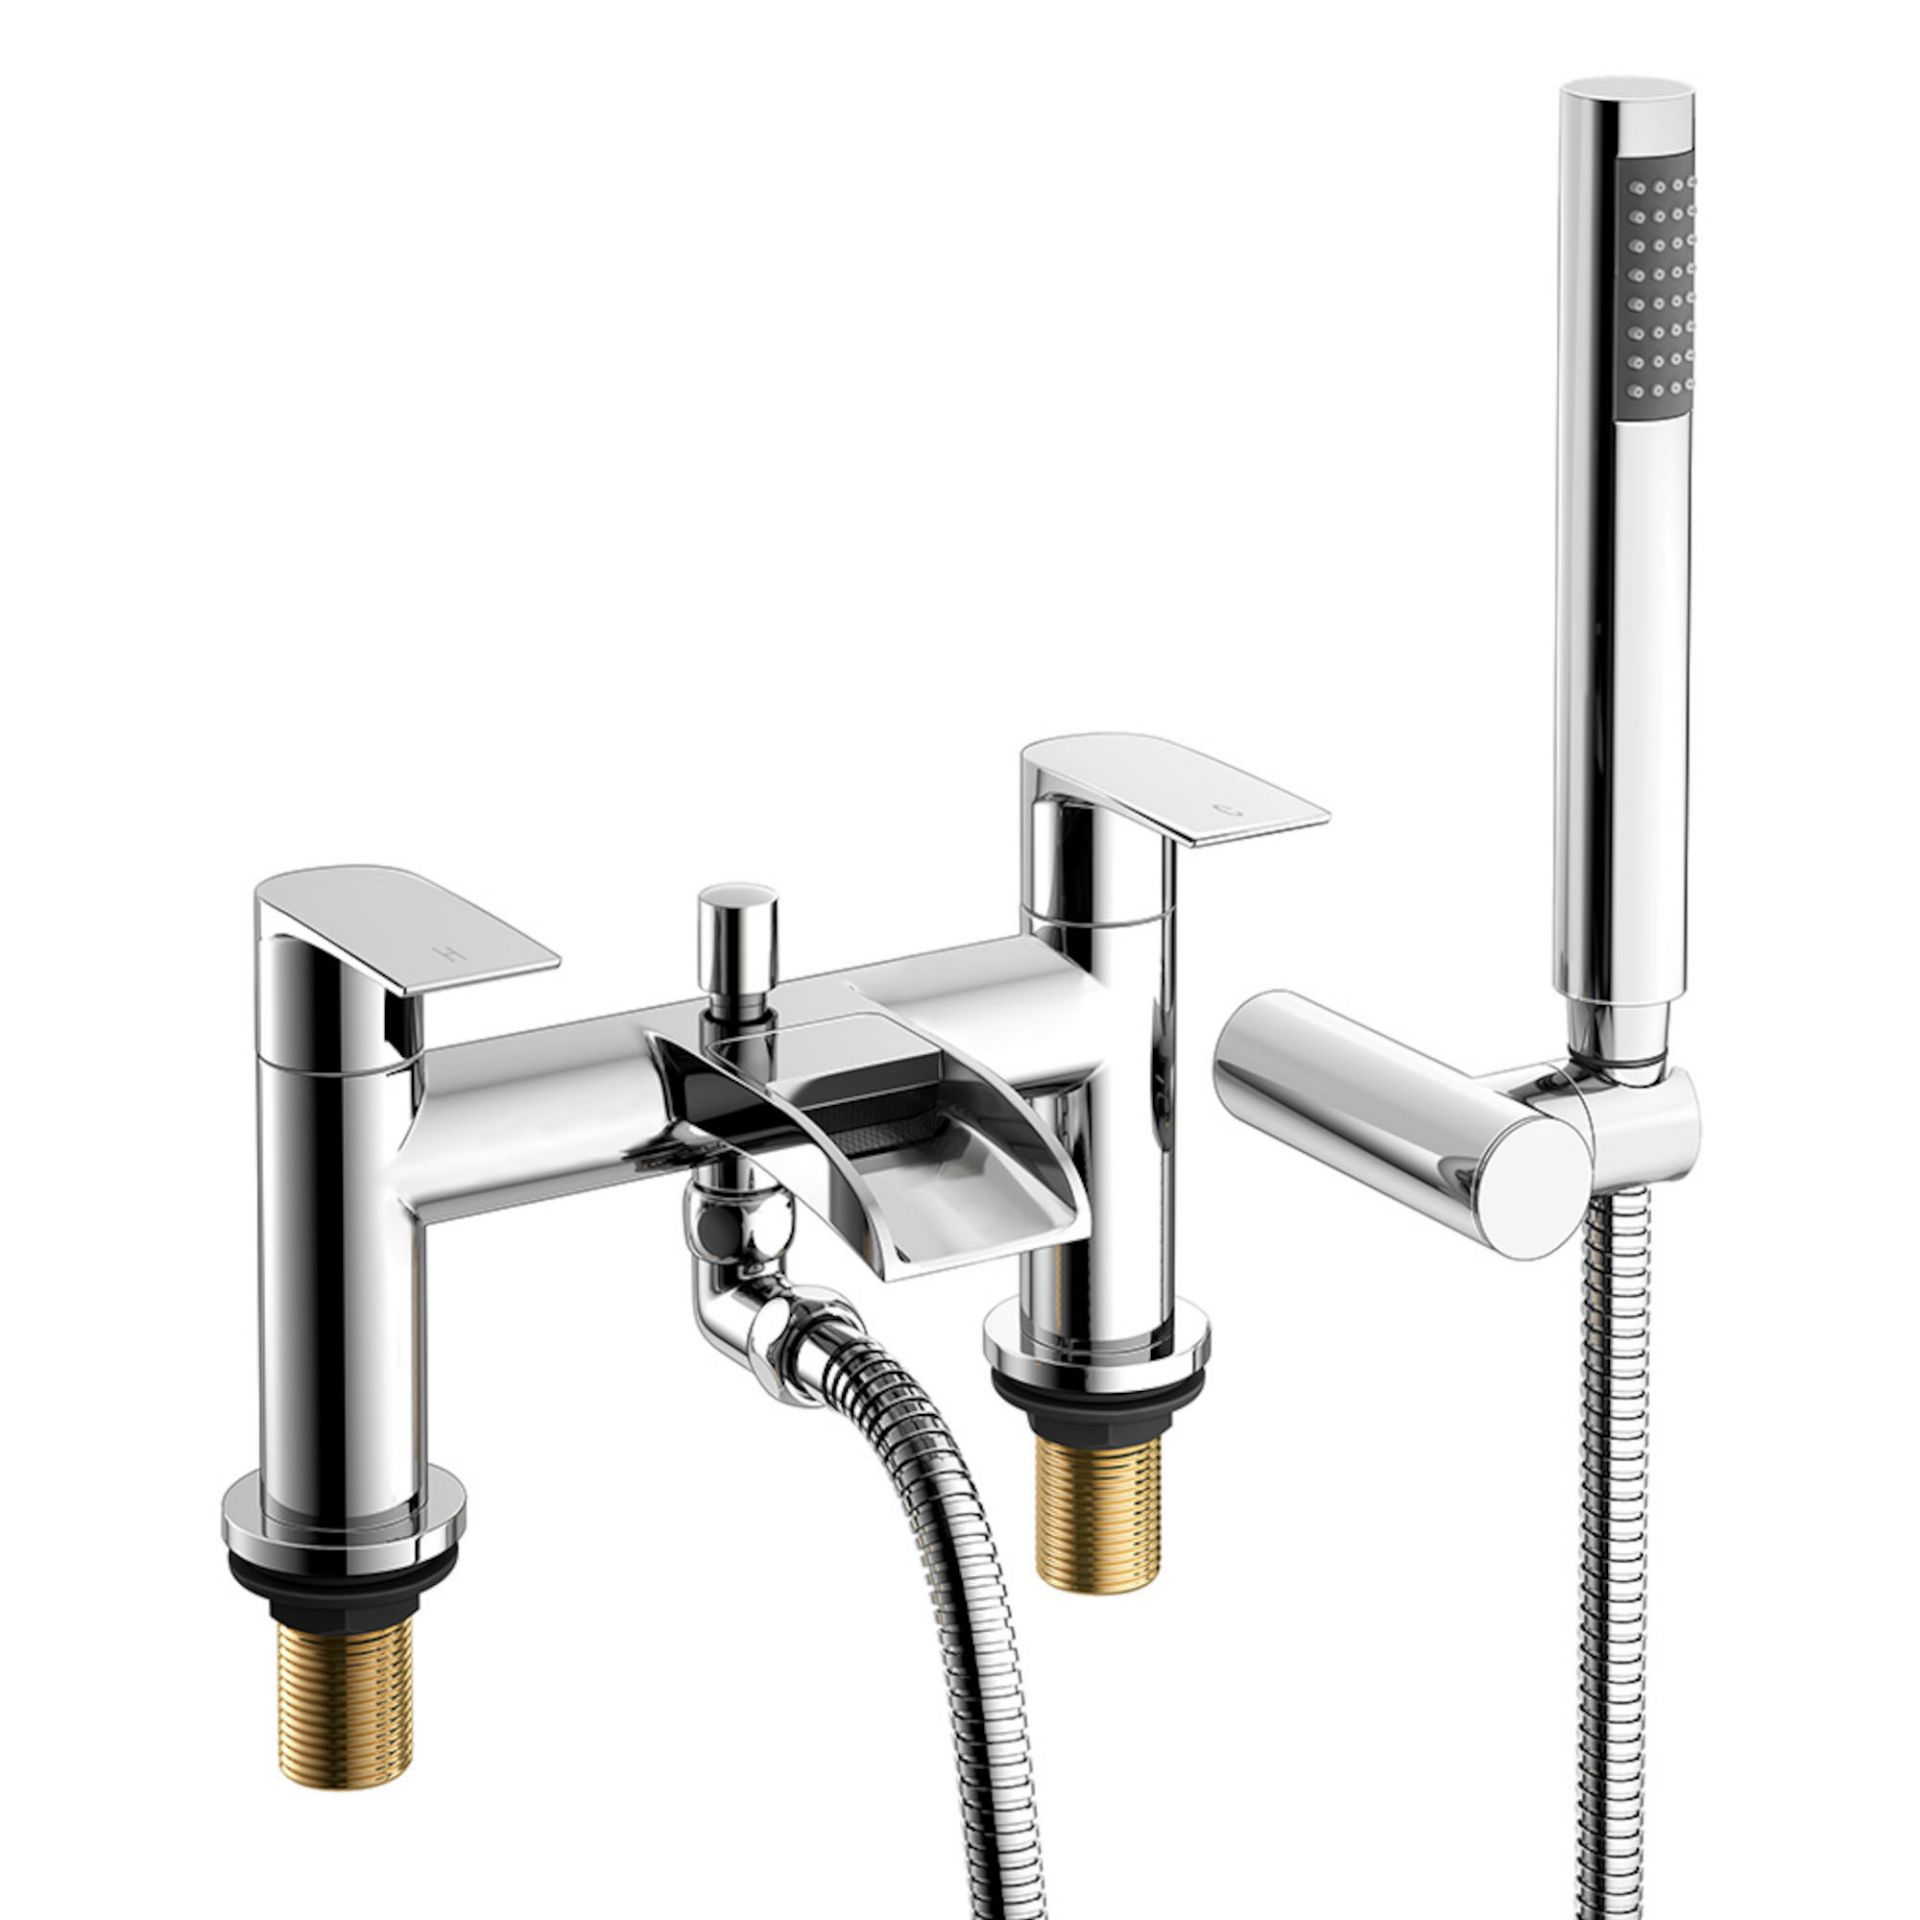 (PT215) Denver Waterfall Bath Mixer Tap & Handheld Shower head Chrome Plated Solid Brass 1/4 turn - Image 2 of 3